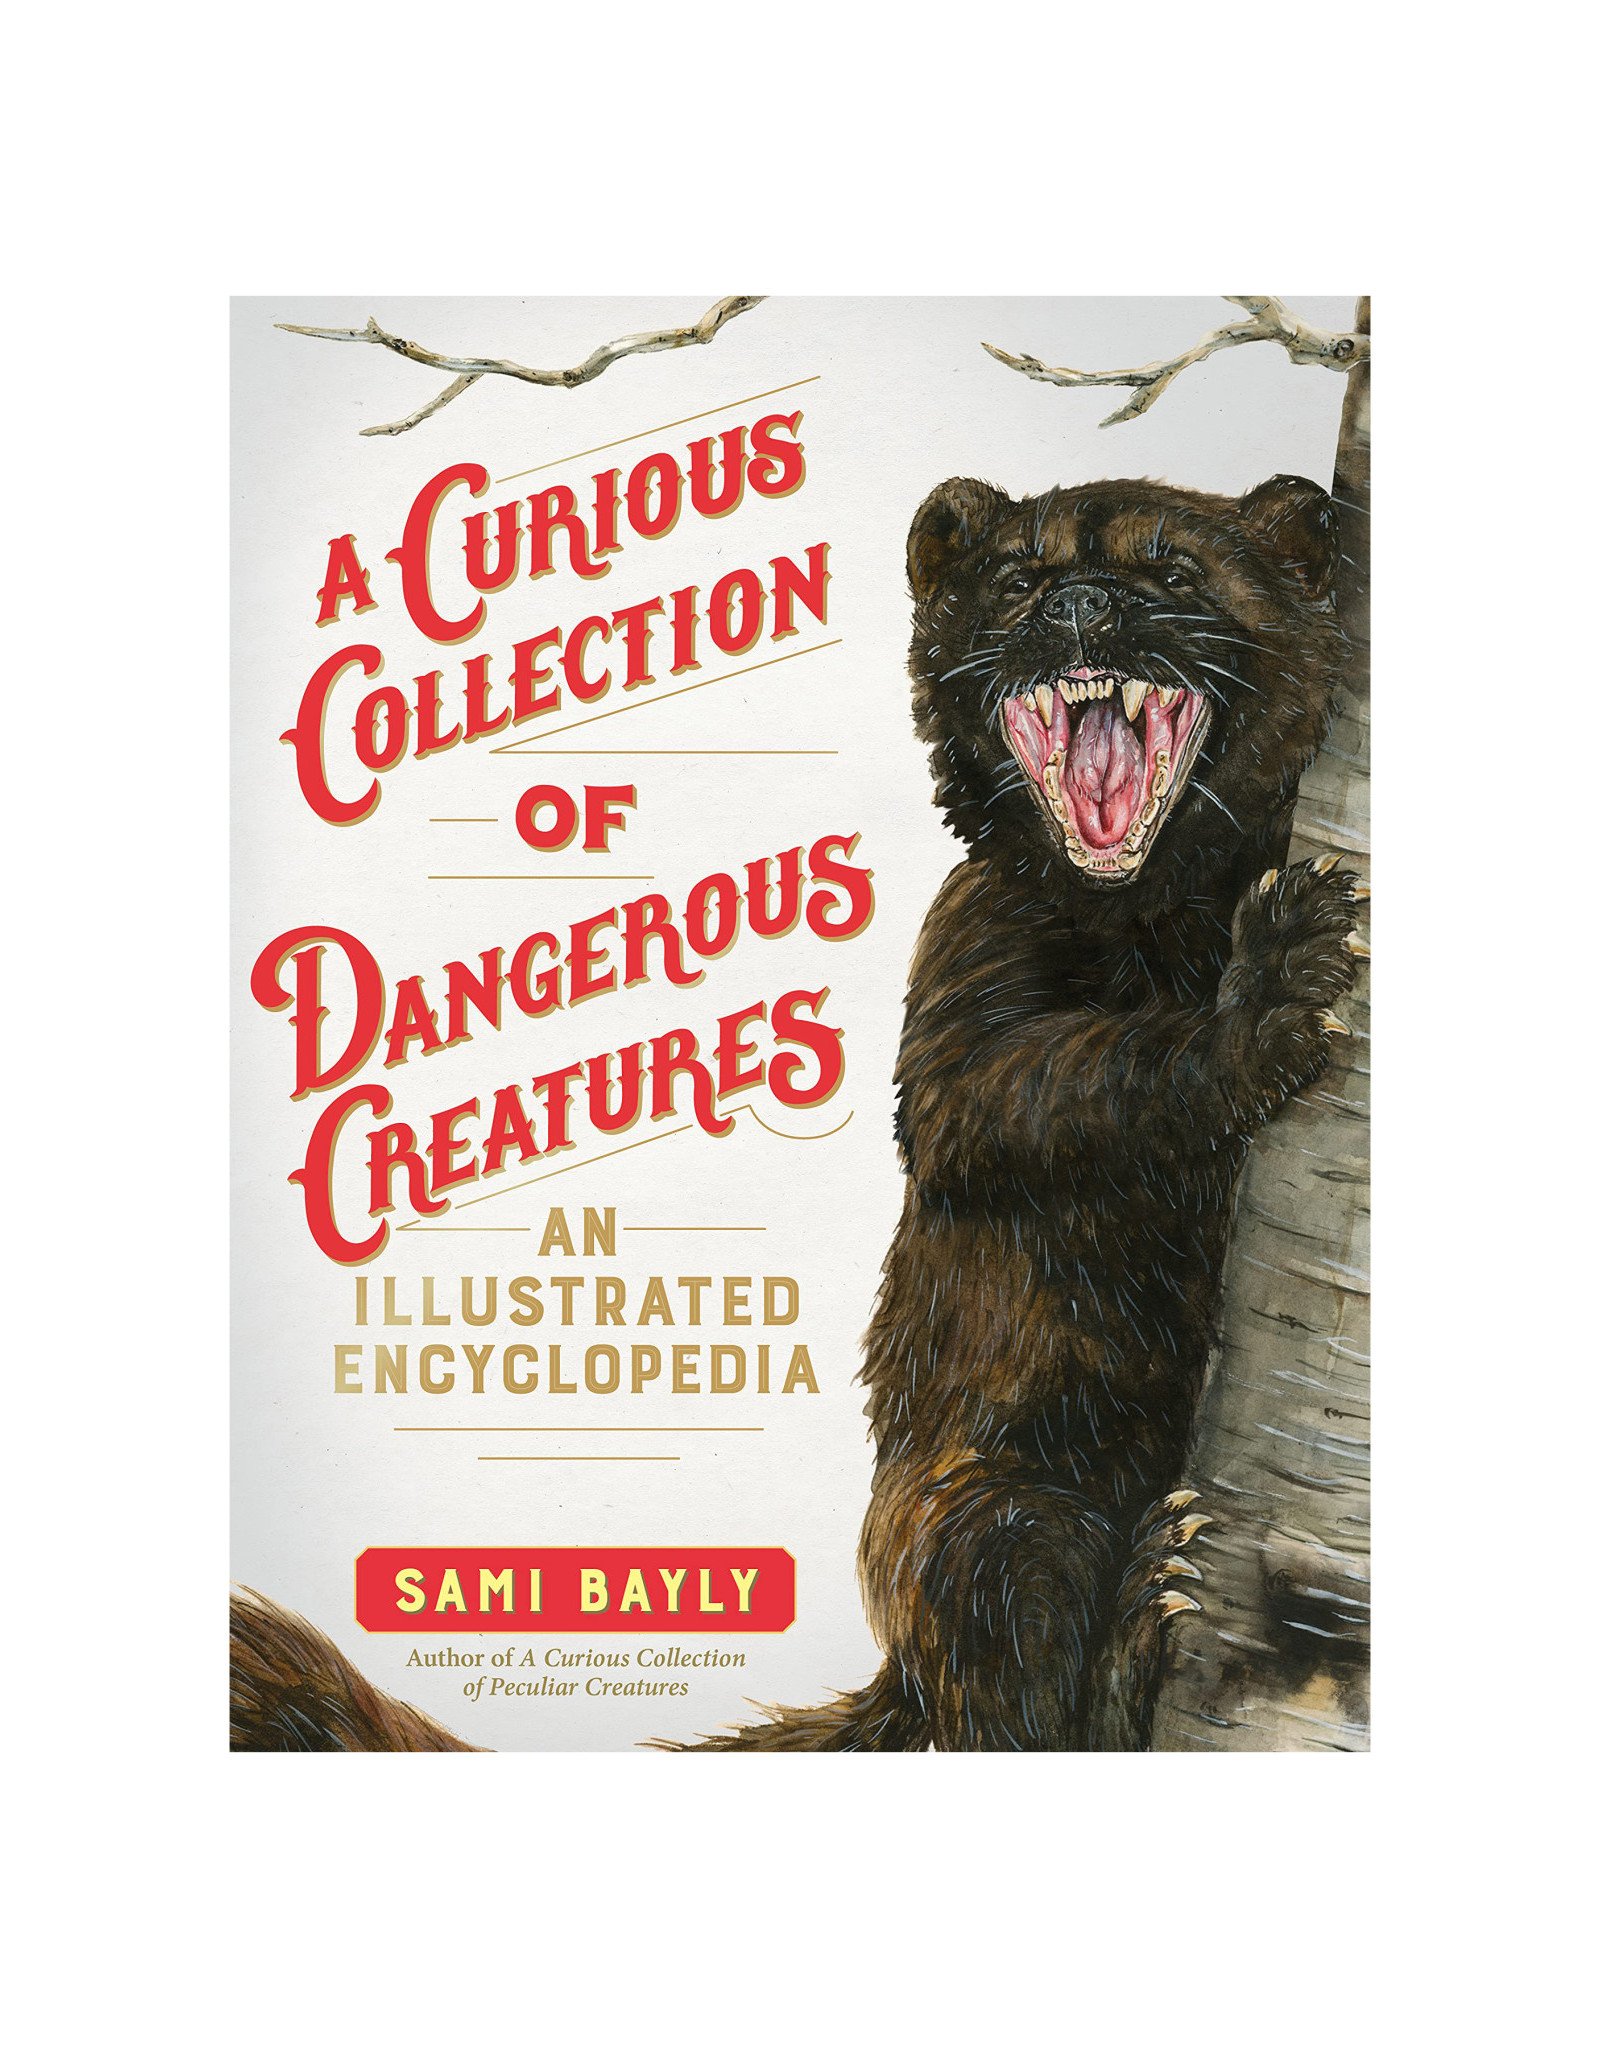 A Curious Collection Of Dangerous Creatures